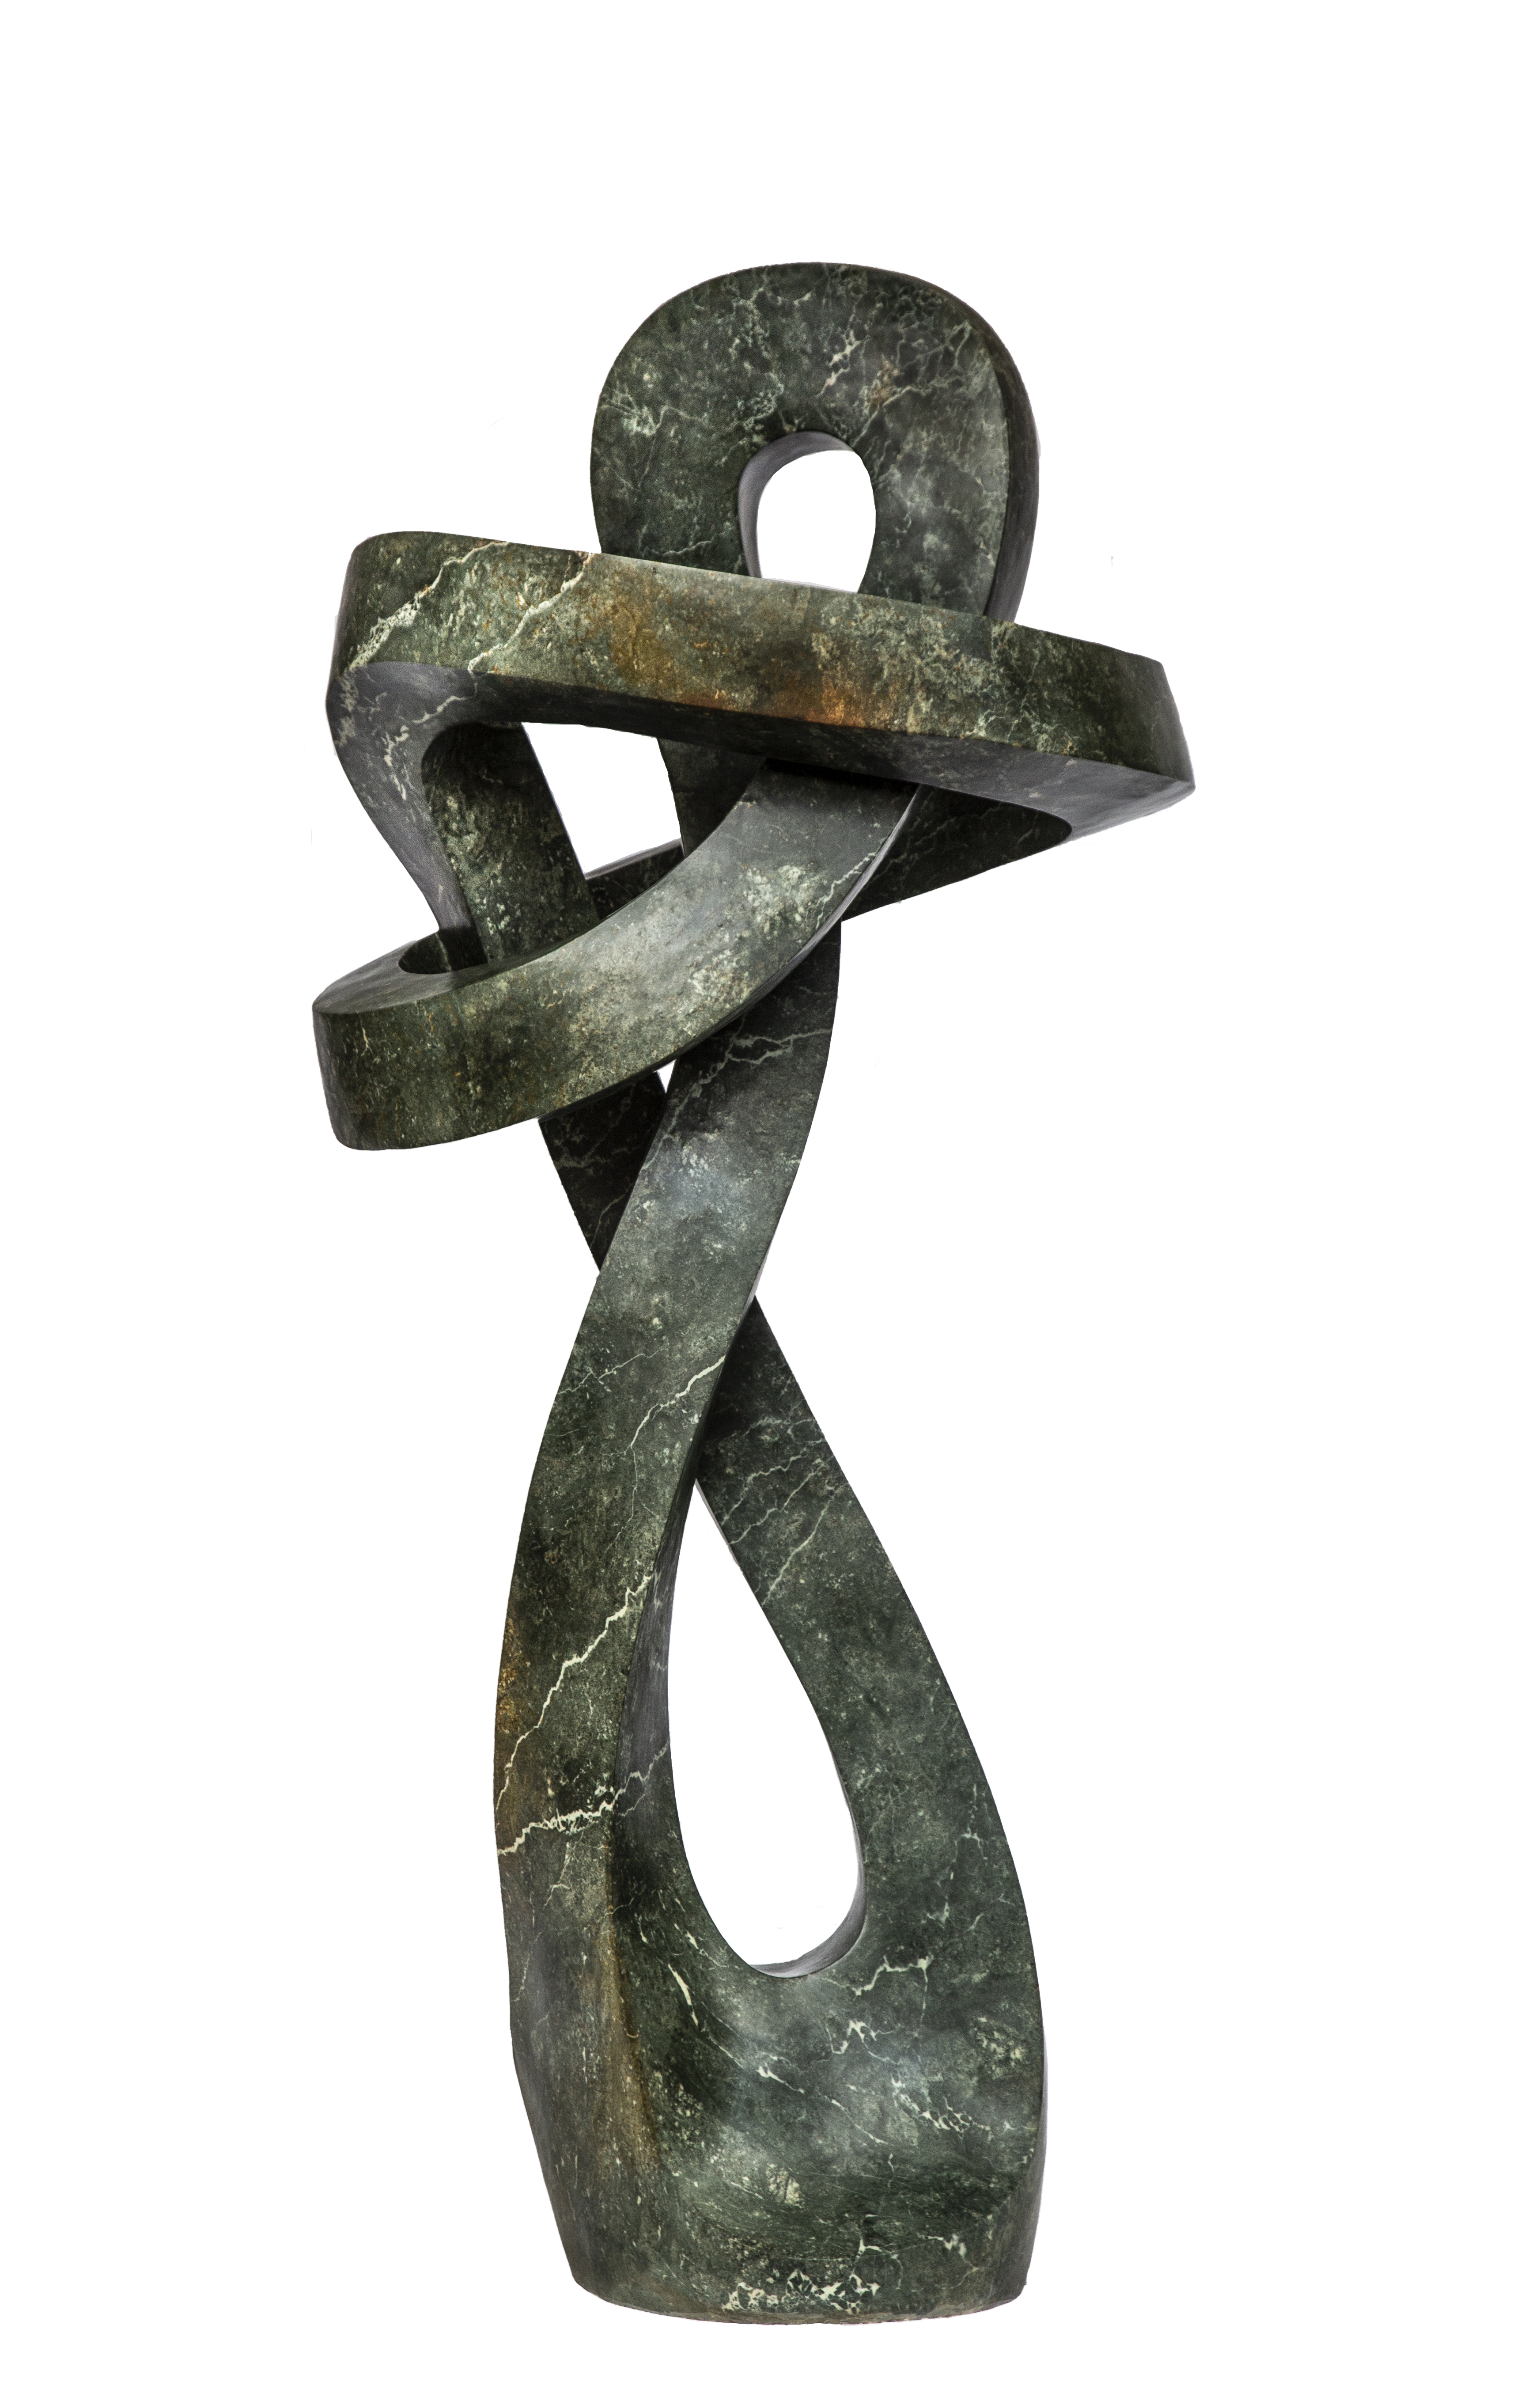 Modern Sculpture: Victor Matafi Confidence Opal Stone Signed 200cm high by 98cm wide by 70cm deep